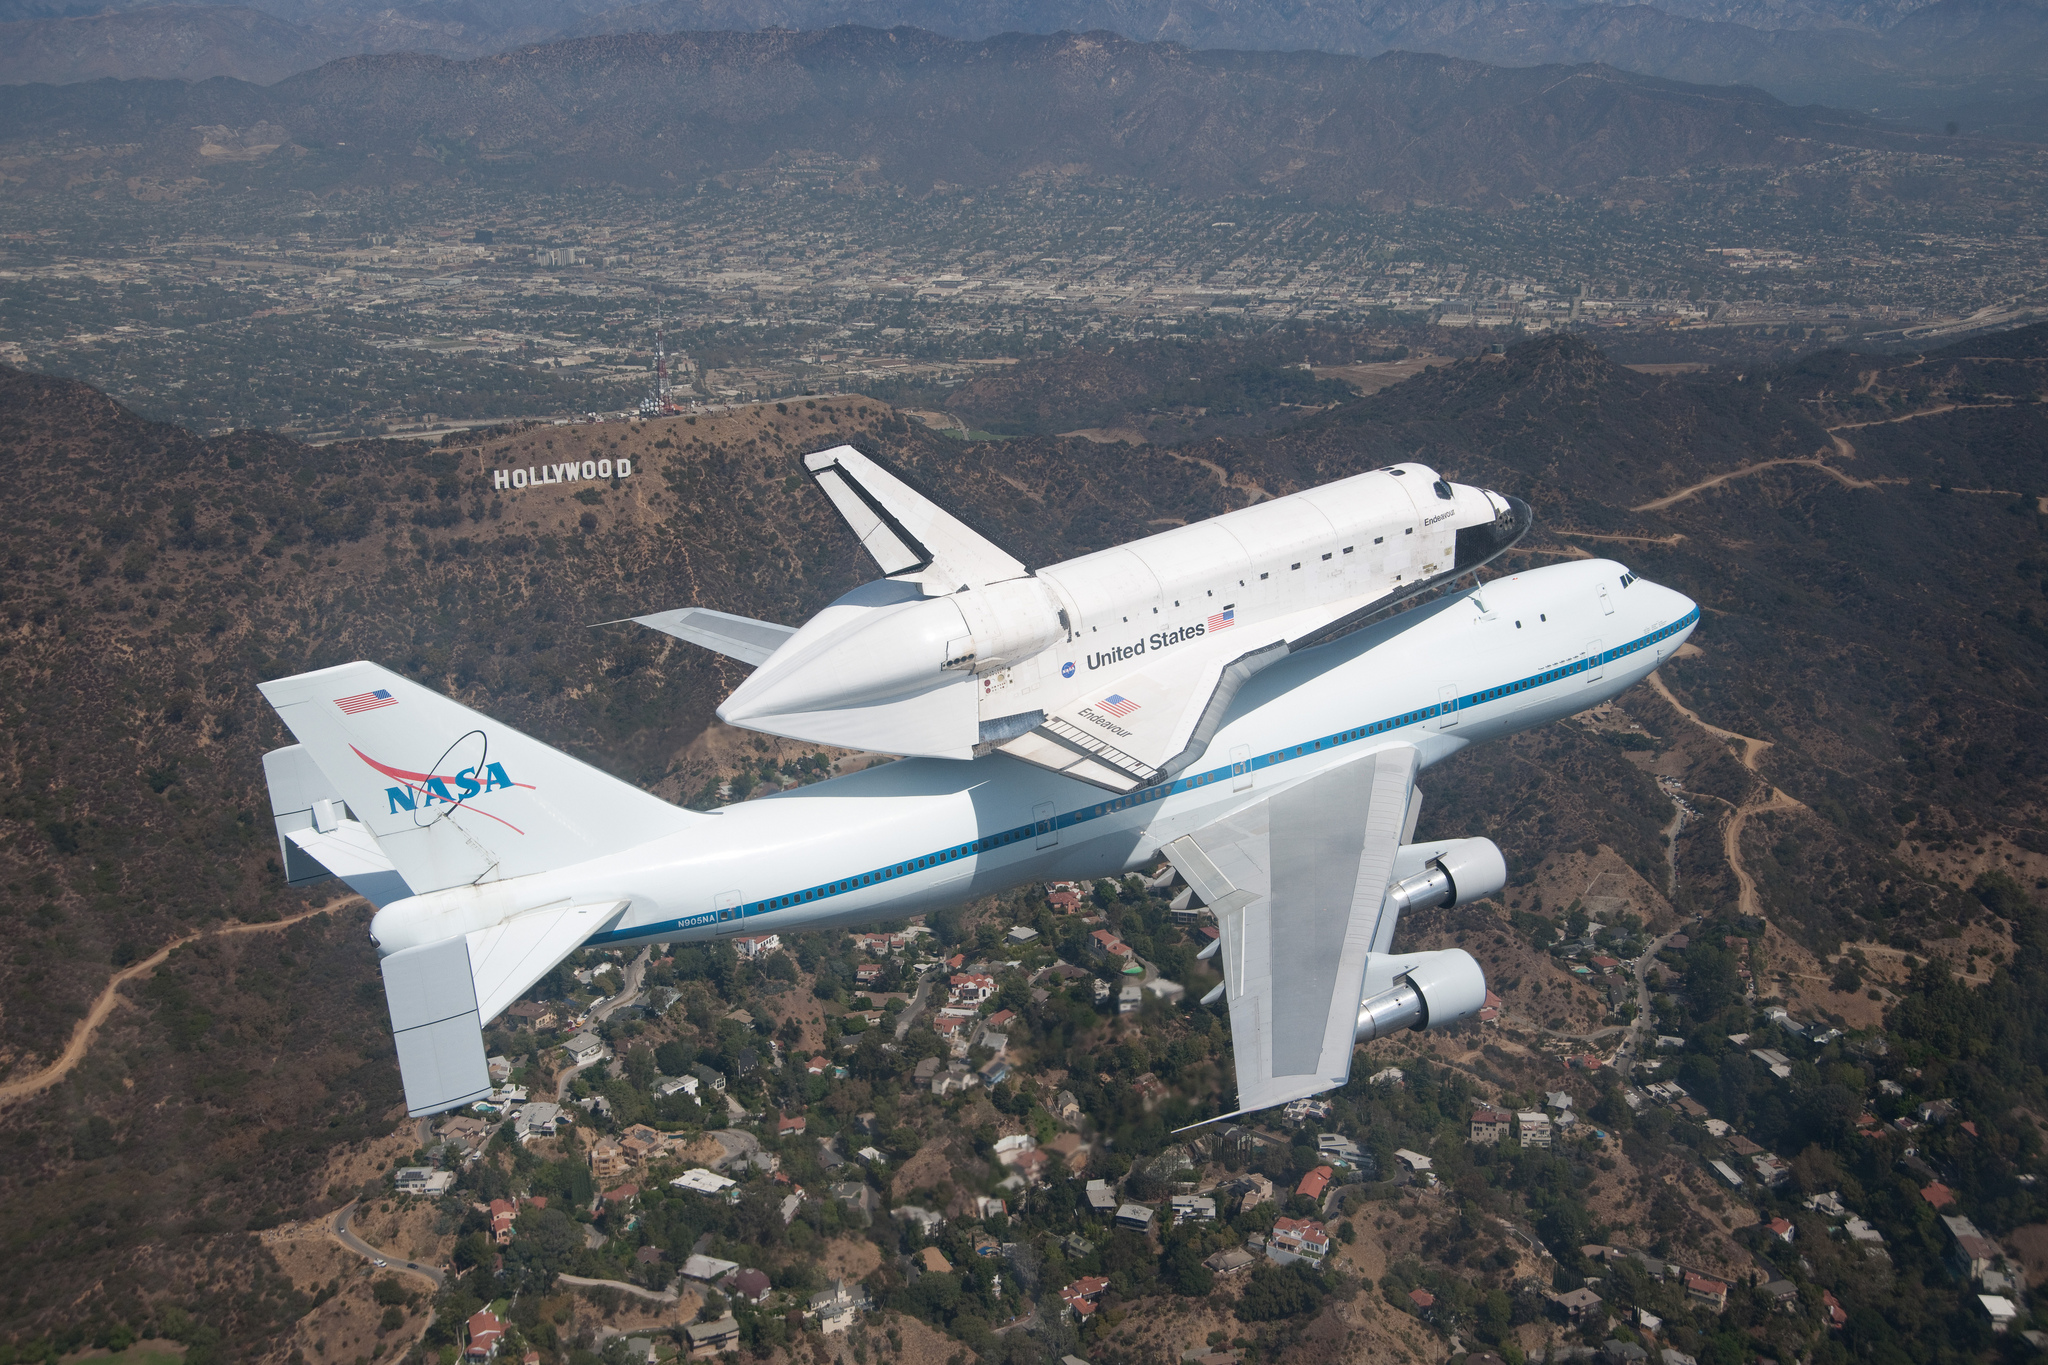 space shuttles, vehicles, space shuttle endeavour, airplane, hollywood hills, nasa, shuttle, space shuttle HD wallpaper